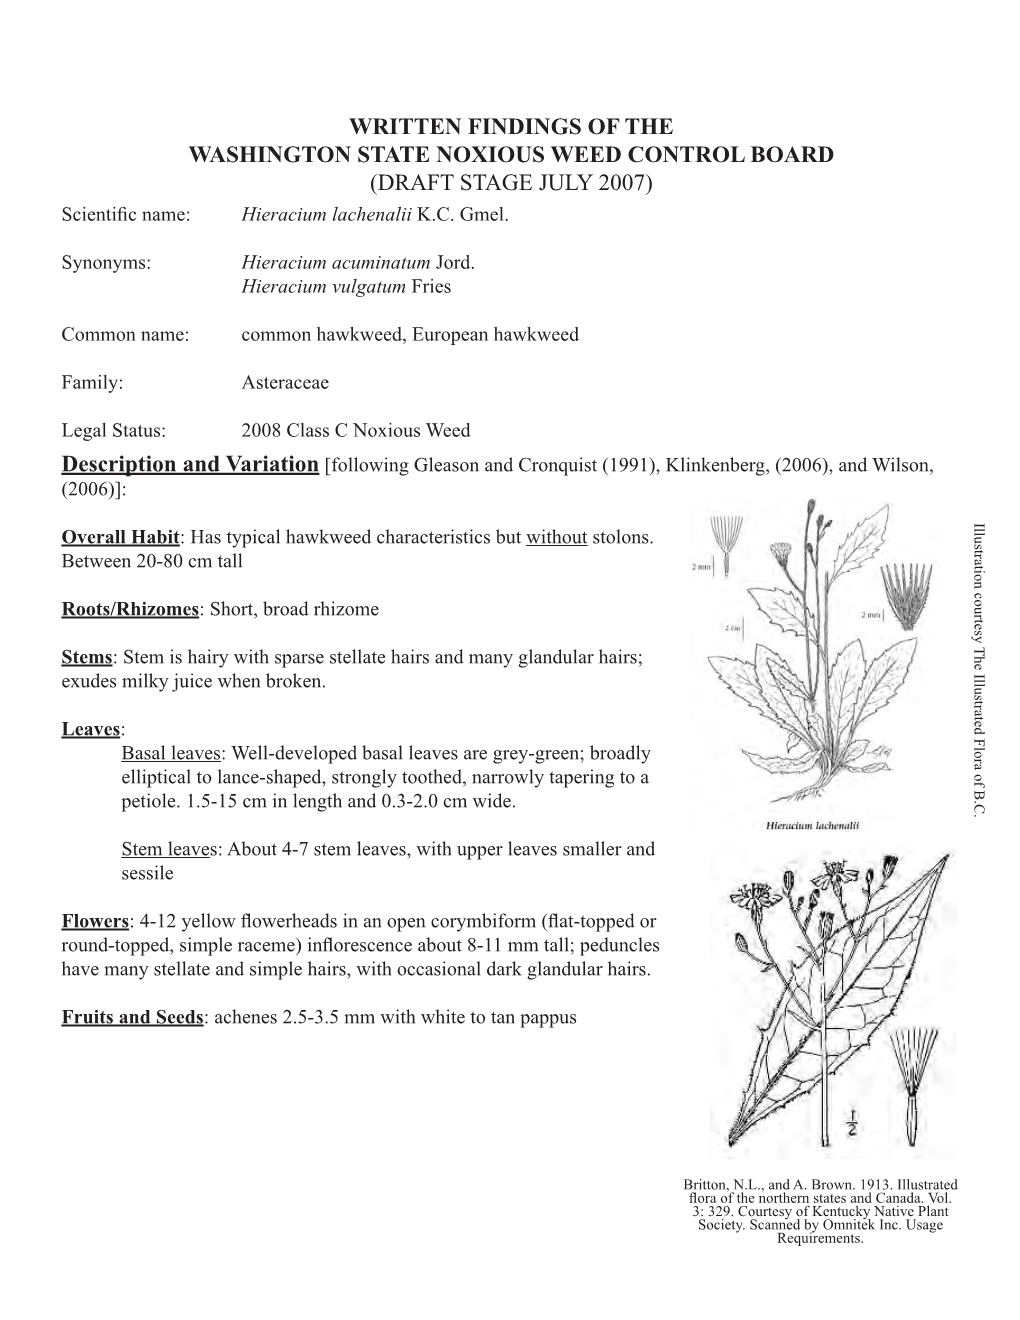 Written Findings of the Washington State Noxious Weed Control Board: Hieracium Lachenalii (Common Hawkweed)